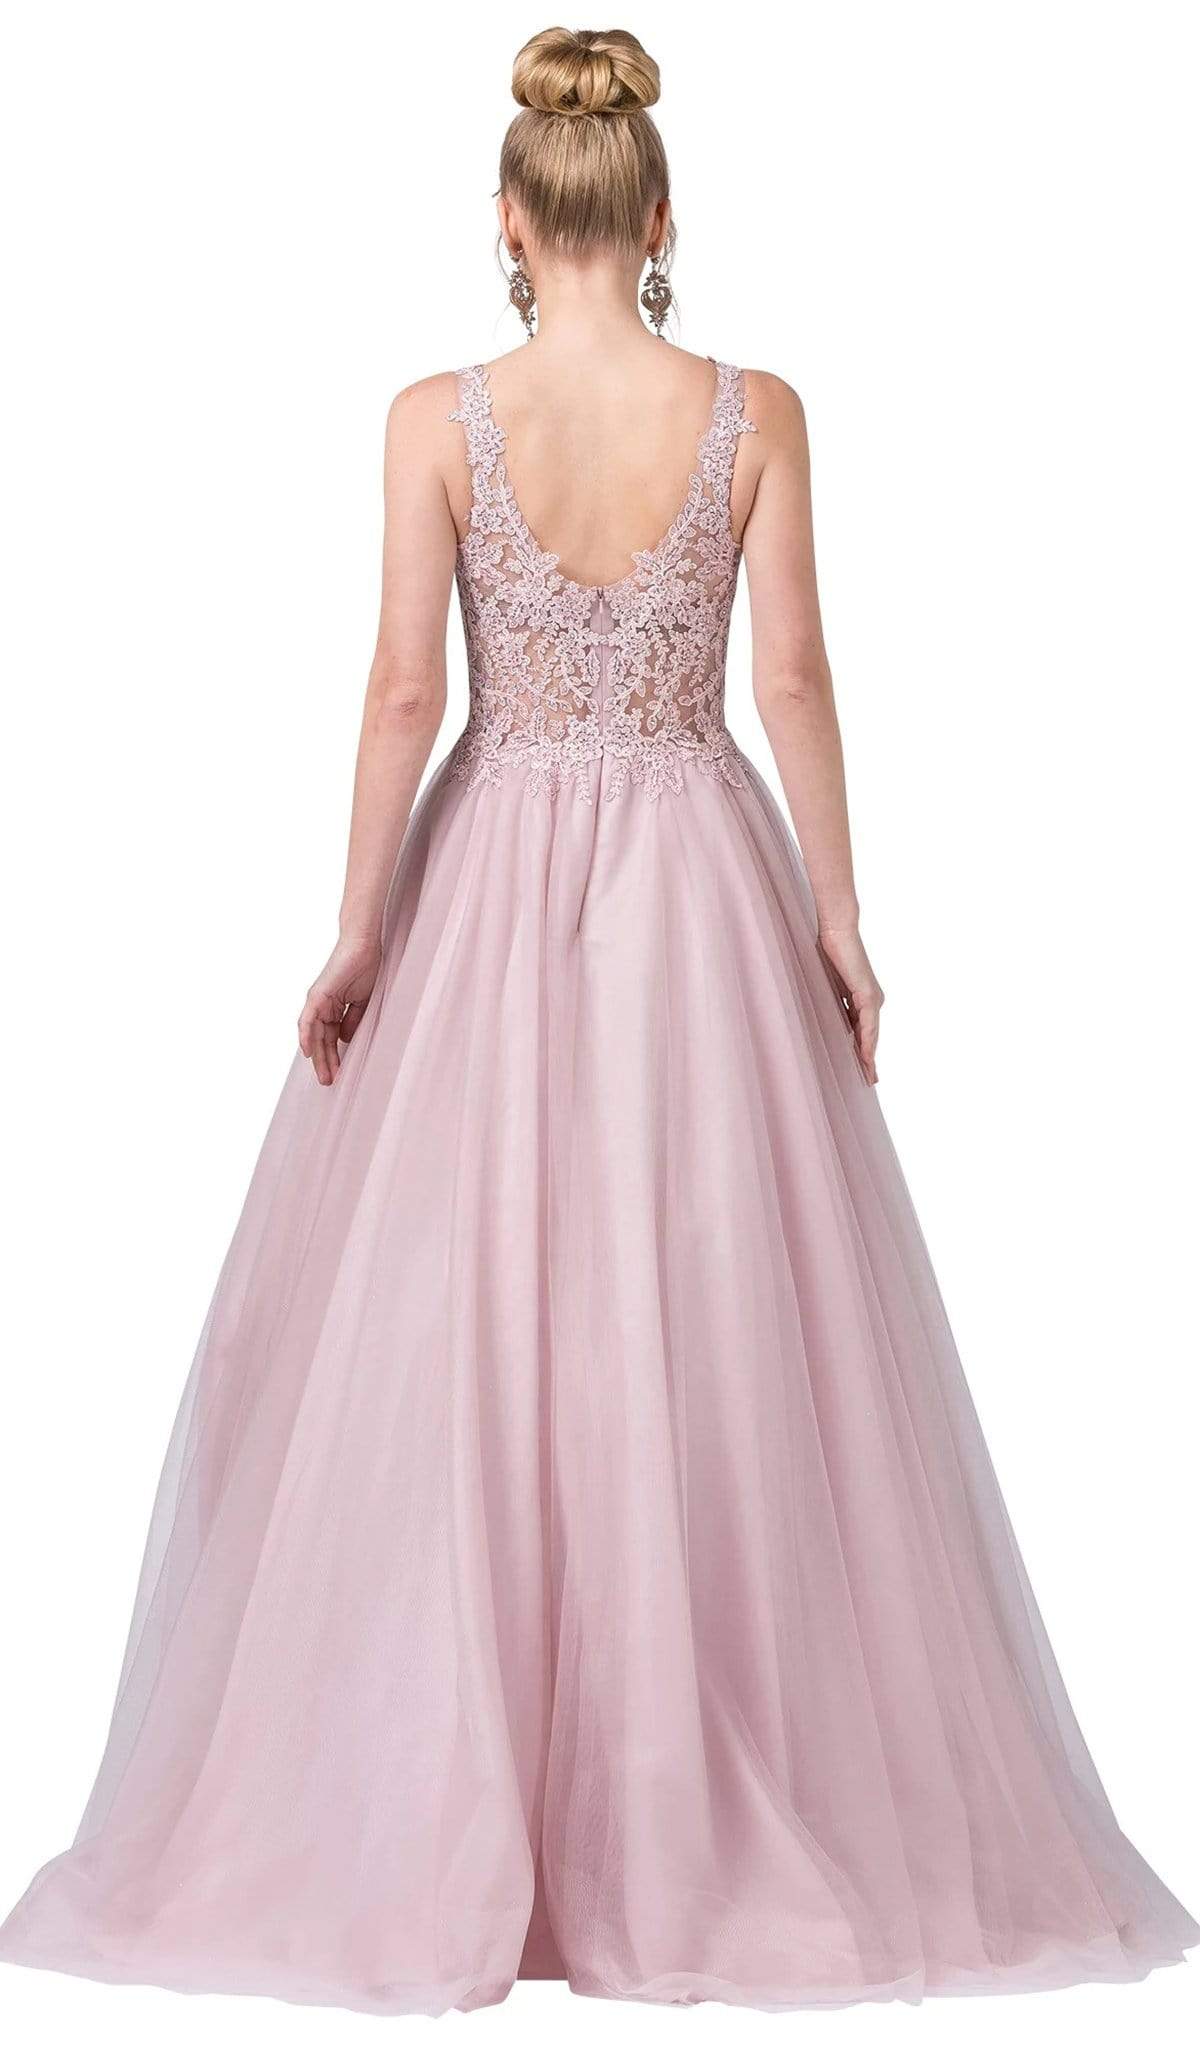 Dancing Queen - 2626 Embroidered V-neck Ballgown Special Occasion Dress